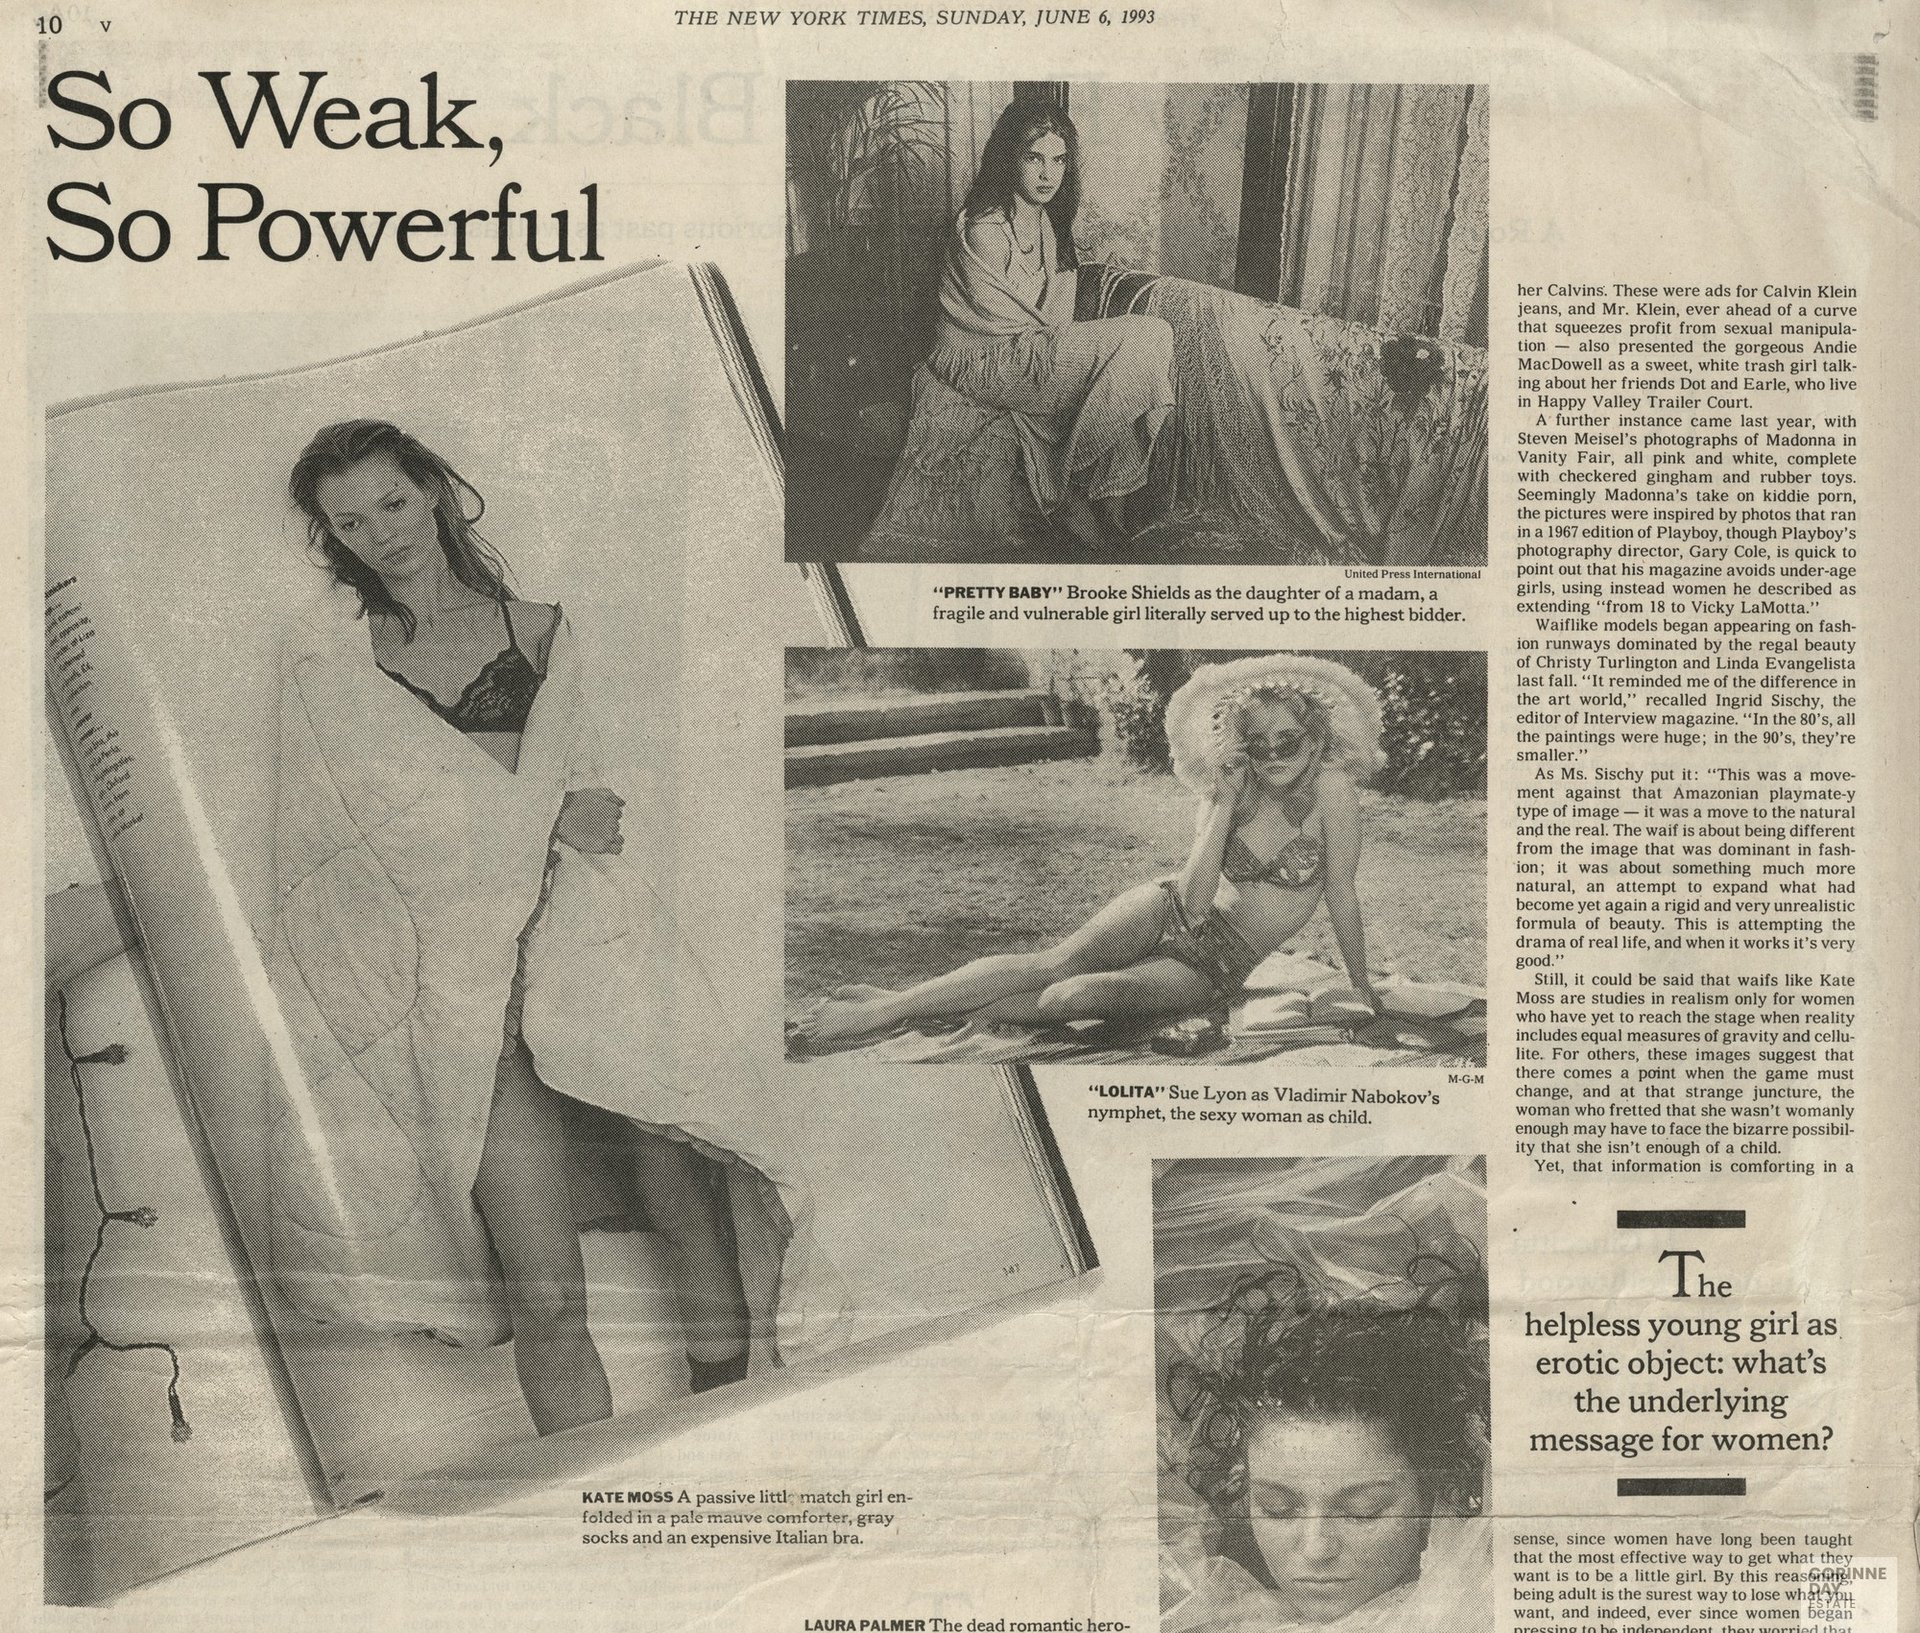 So Weak, So Powerful, The New York Times, 6 Jun 1993 — Image 1 of 2